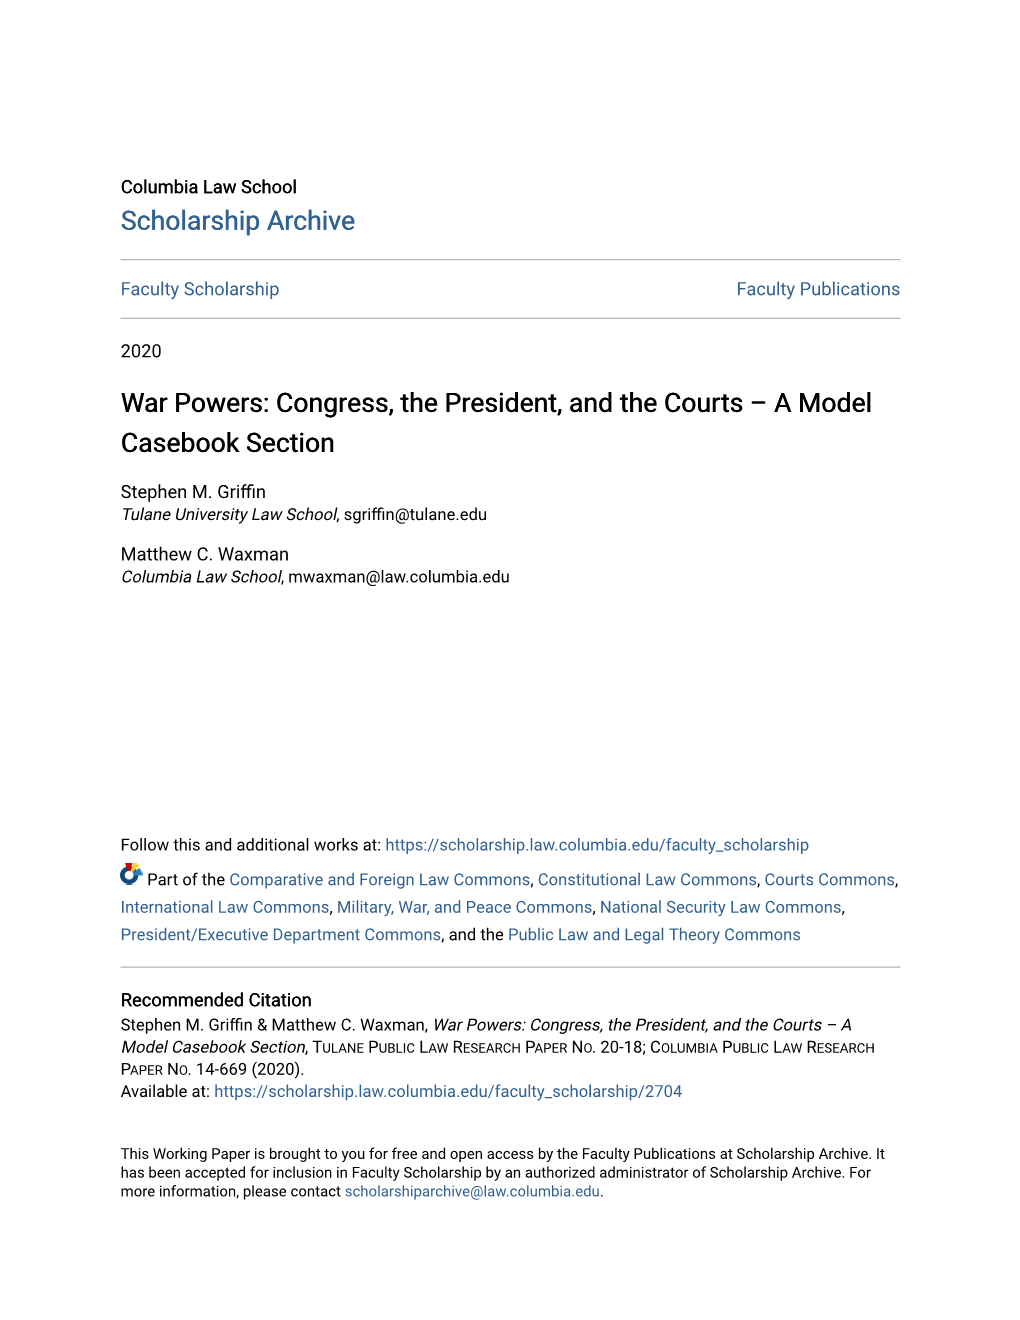 War Powers: Congress, the President, and the Courts – a Model Casebook Section